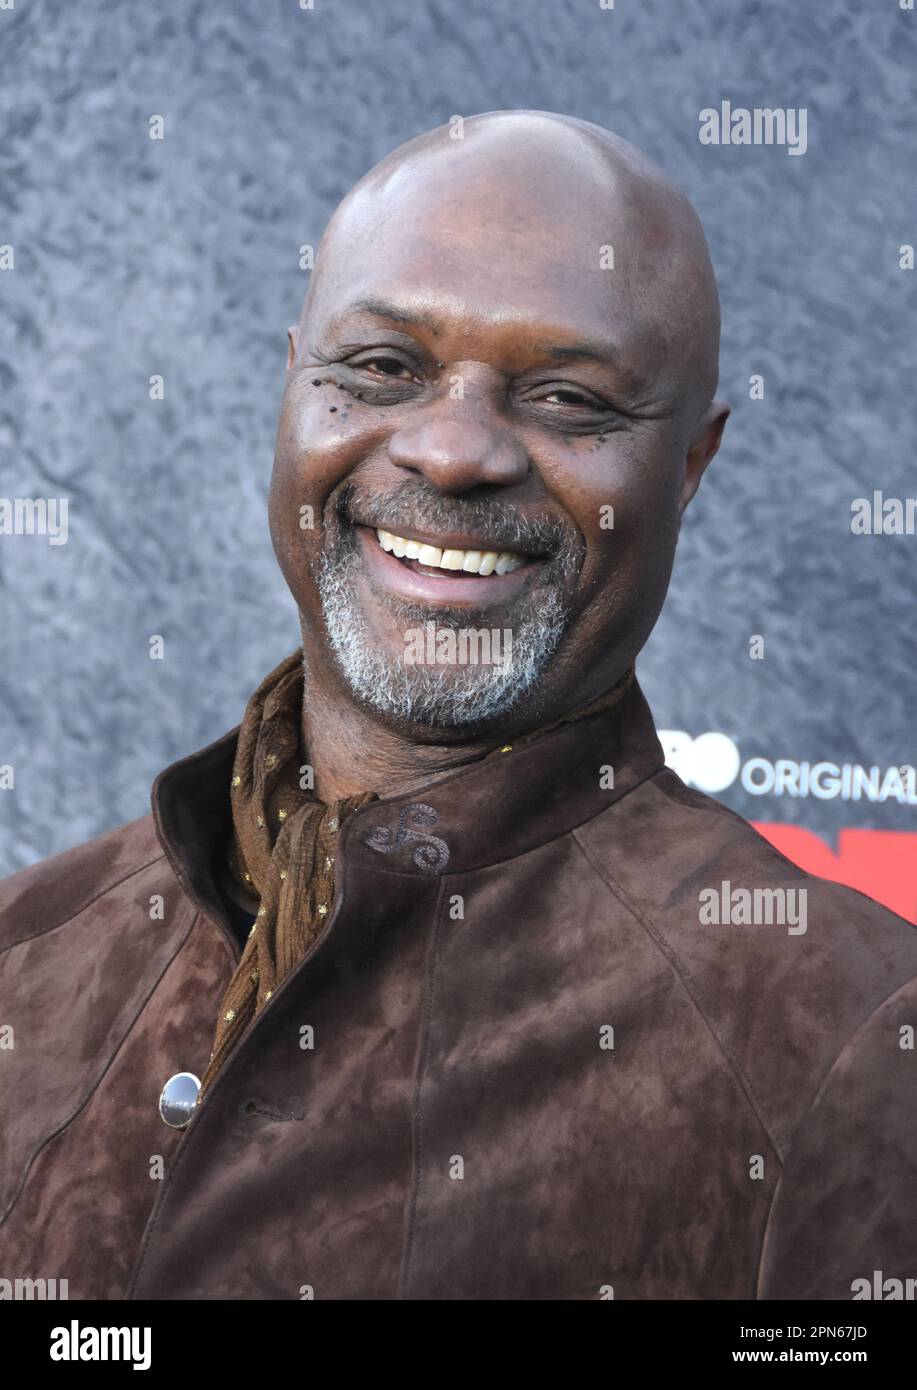 Los Angeles, California, USA 16th April 2023 Actor Robert Wisdom attends HBO Original Comedy Series Barry Season 4 Premiere at Hollywood Forever Cemetery on April 16, 2023 in Los Angeles, California, USA. Photo by Barry King/Alamy Live News Stock Photo